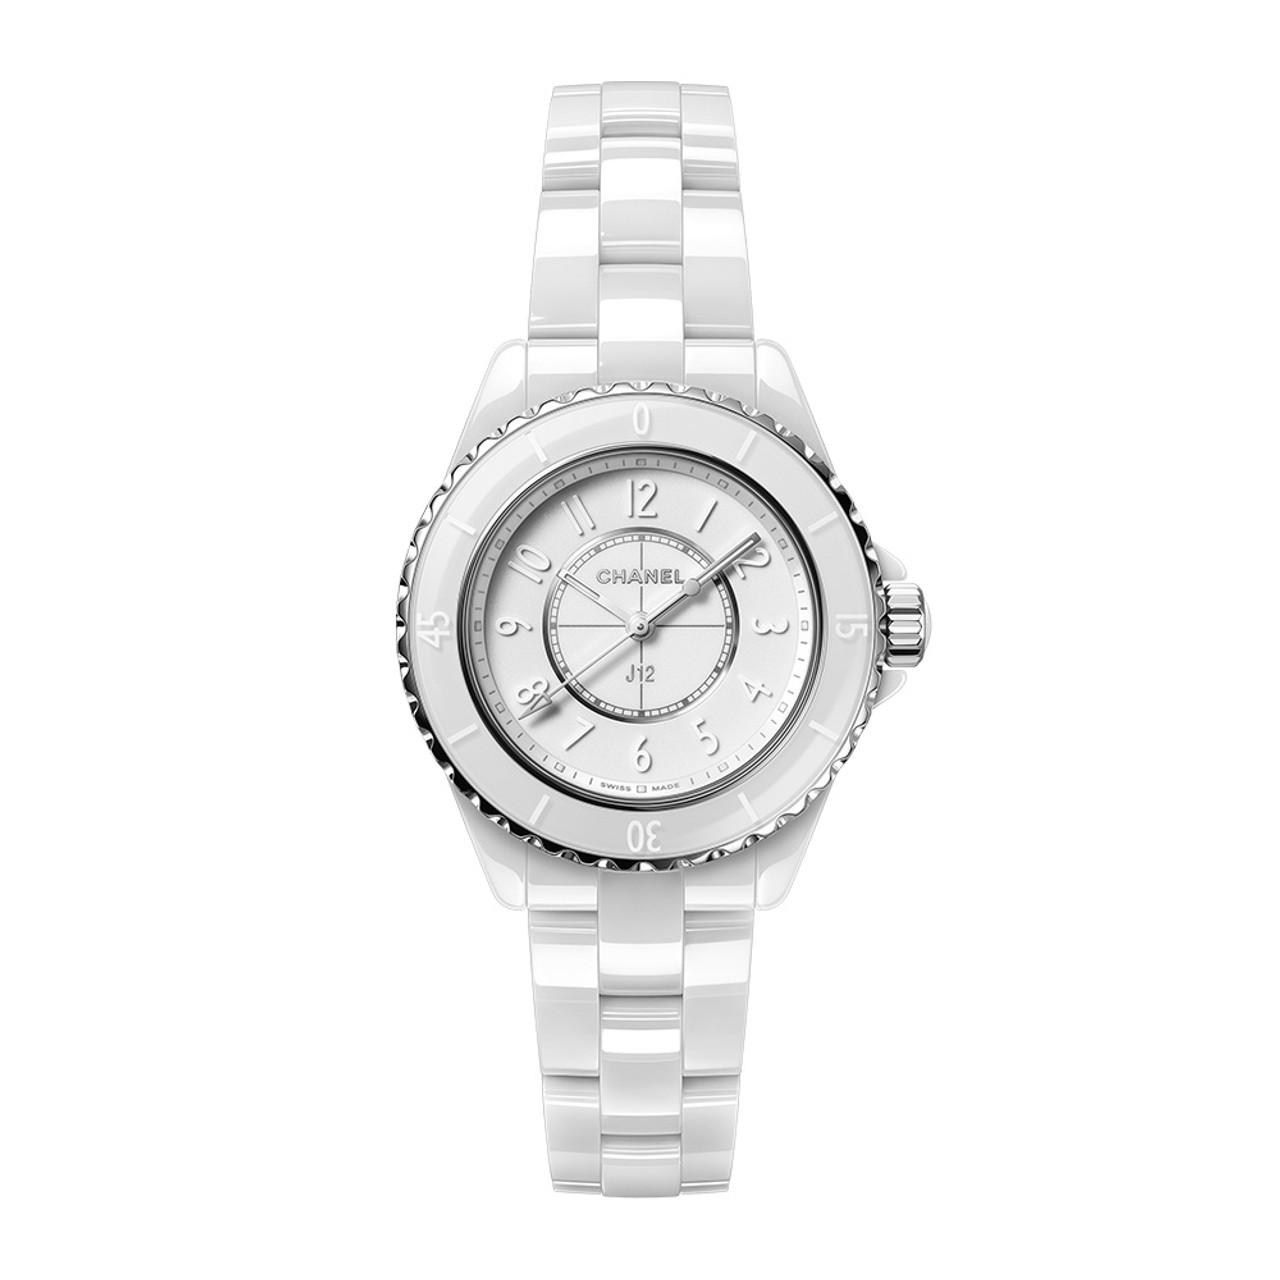 CHANEL Stainless Steel Ceramic 33mm J12 Limited Edition Graffiti